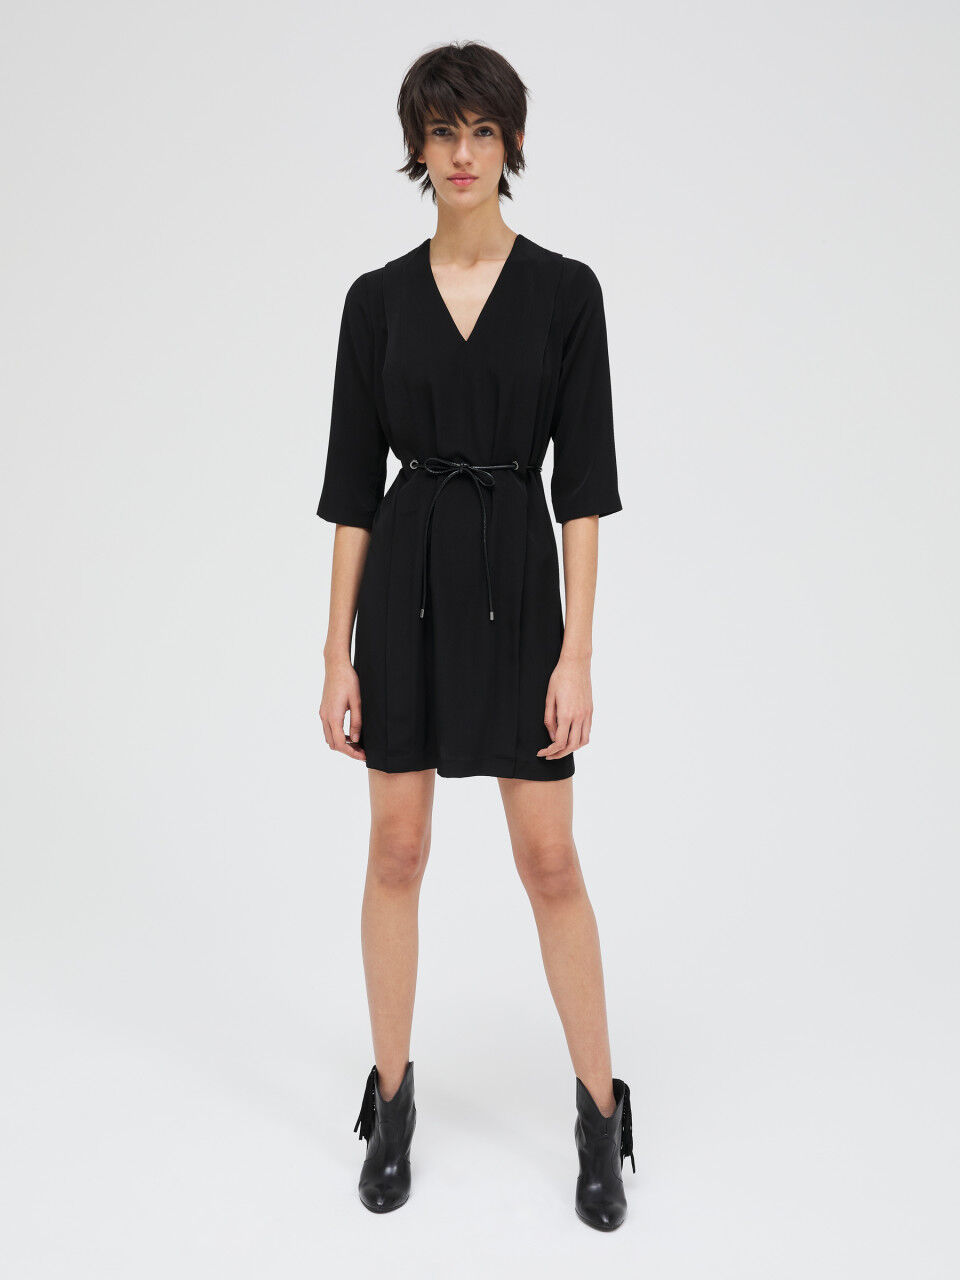 Women's Dresses and Jumpsuits New Collection 2021 | Sisley